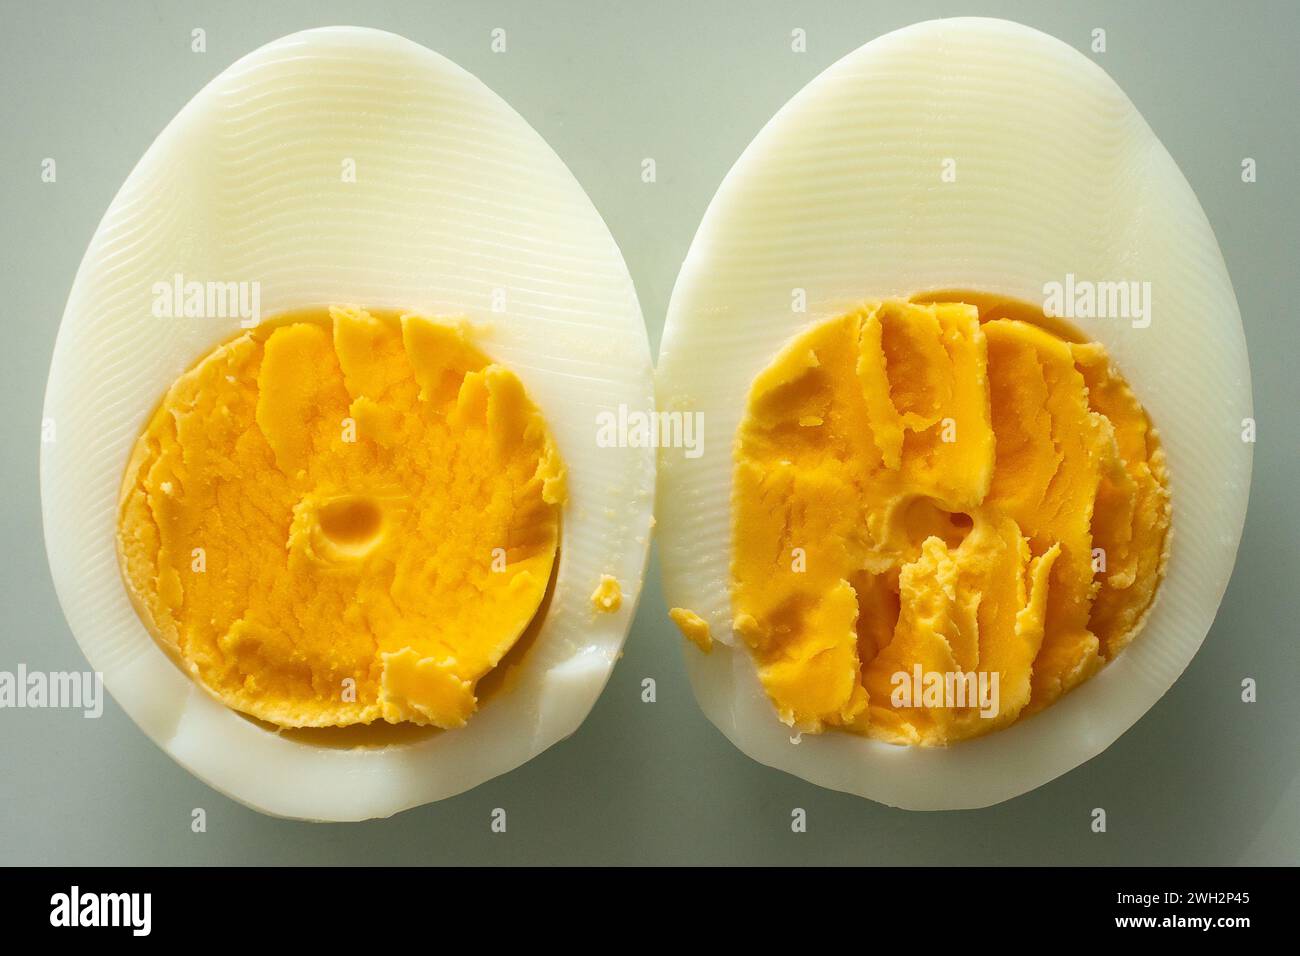 Close up of an egg cut in two halves on a white grey background. Stock Photo